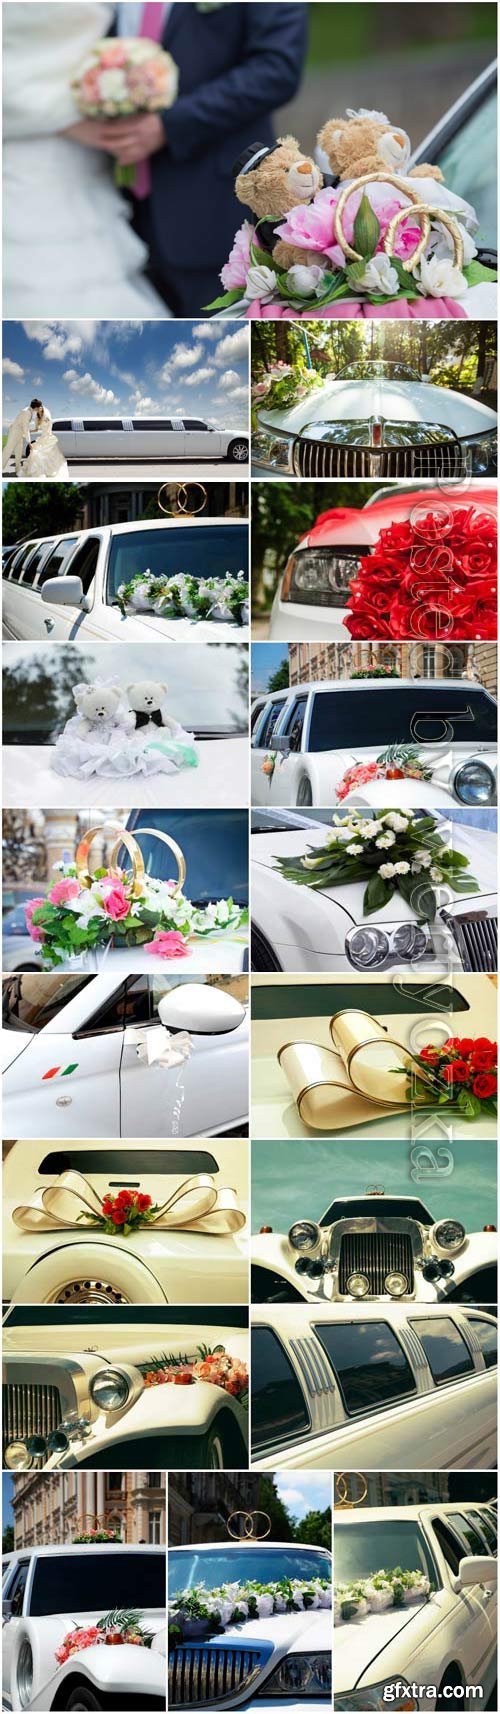 Decorated wedding cars, bride and groom stock photo